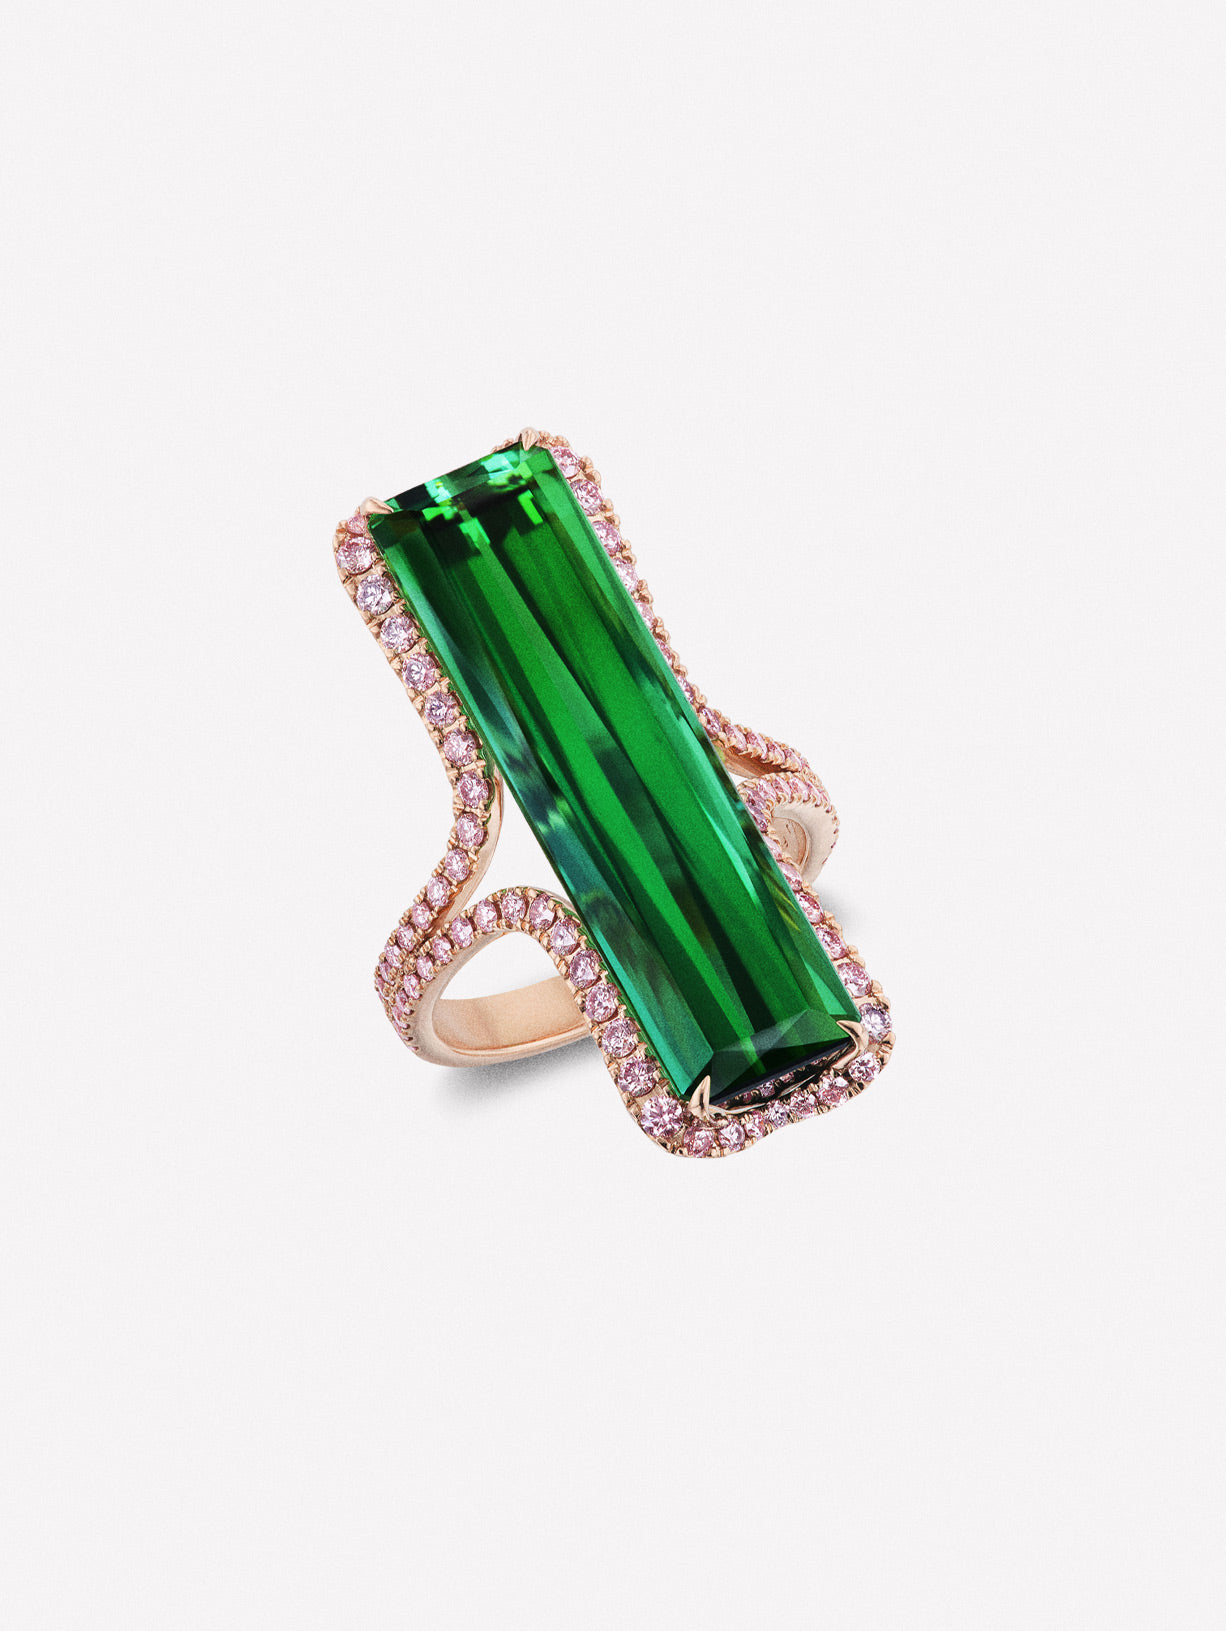 Argyle Pink™ Diamond and Green Tourmaline Ring by J FINE with a 14.20ct Tourmaline